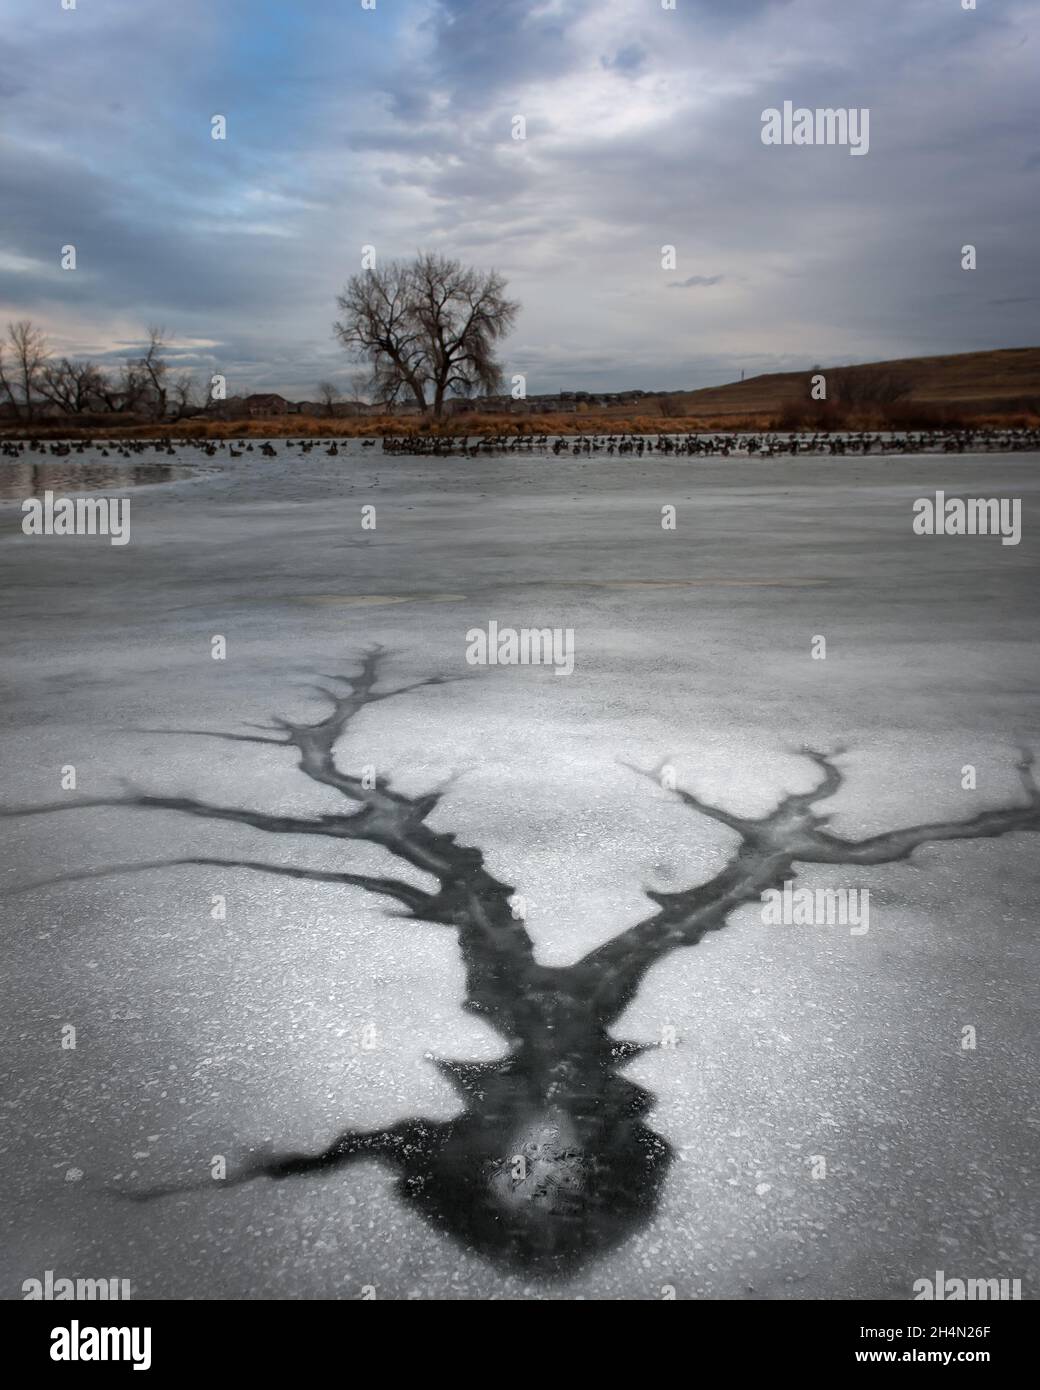 A large crack in the ice of a pond that has refrozen looks like antlers Stock Photo